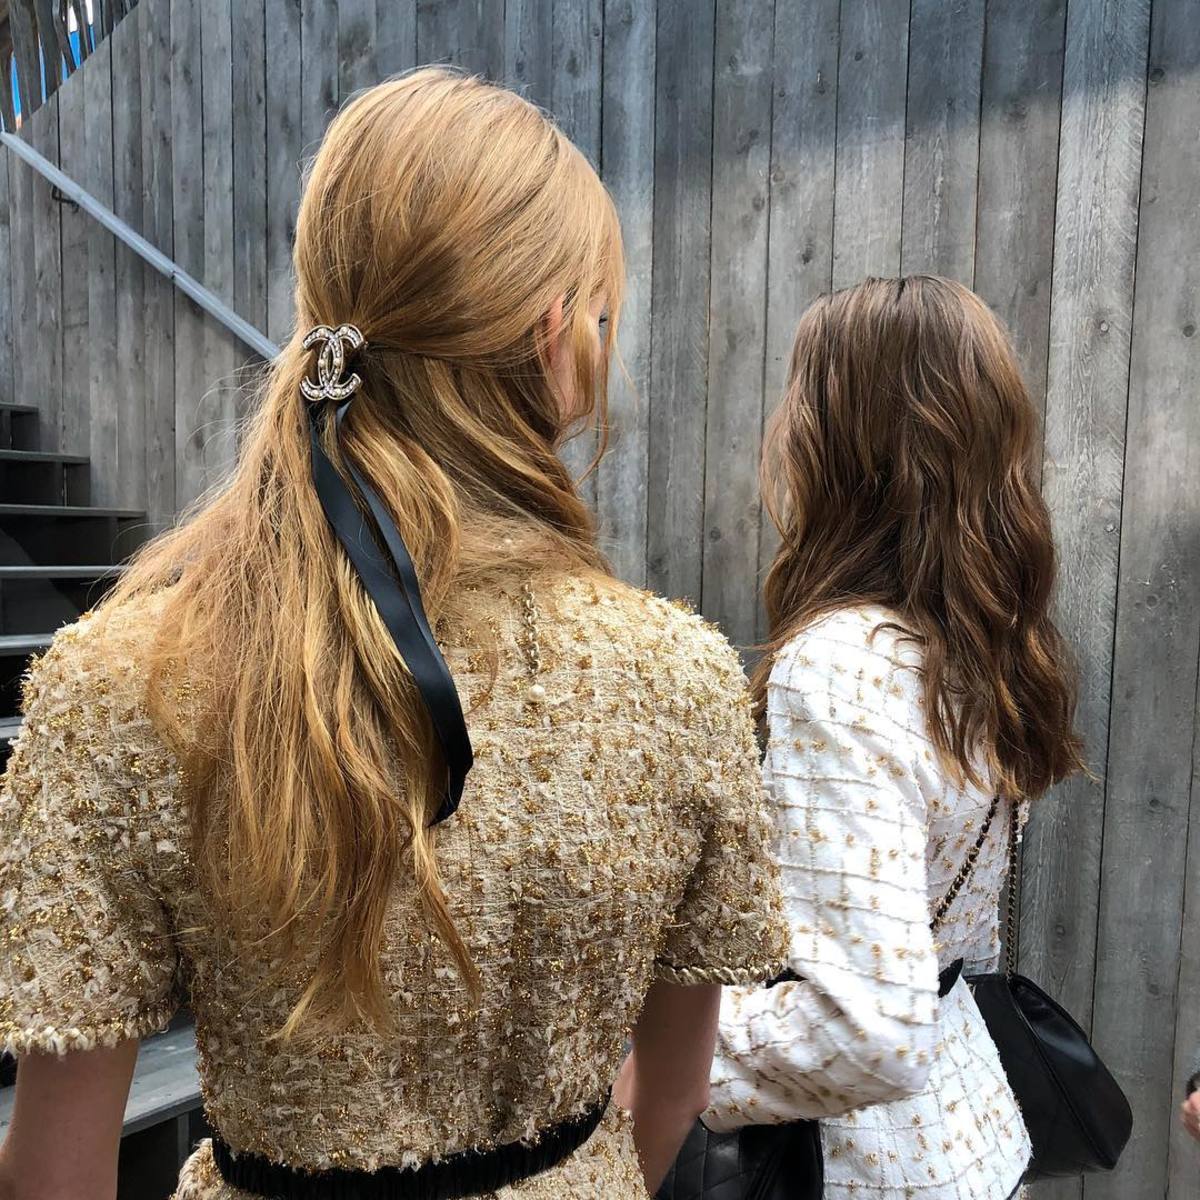 The beauty look at Chanel's Spring 2019 show. Photo: @hairbysammcknight/Instagram